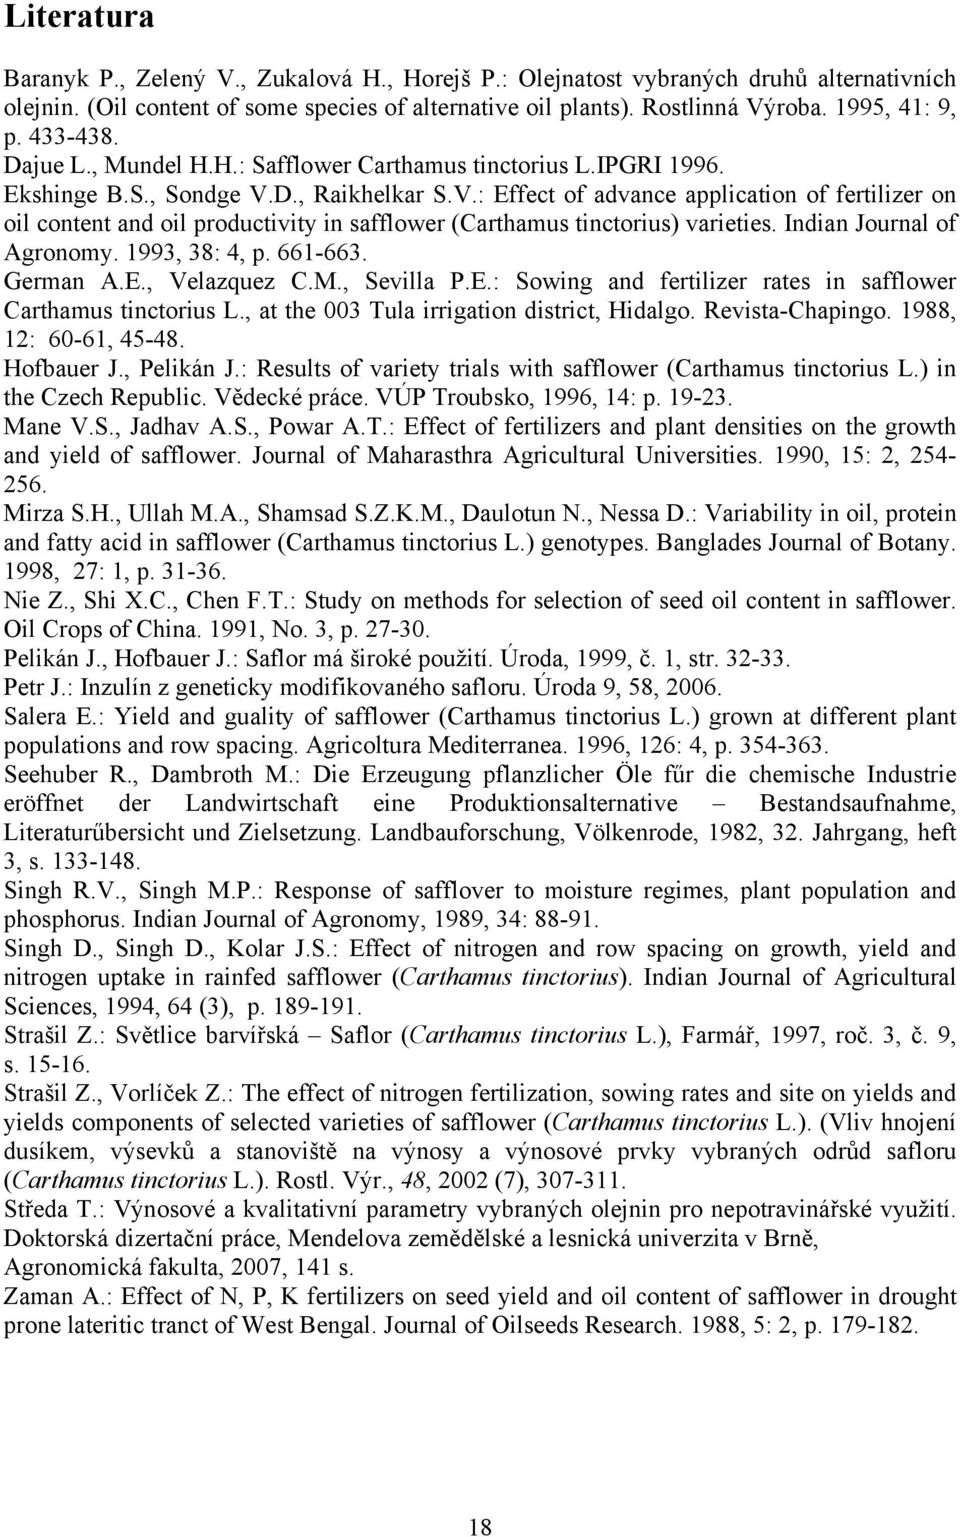 D., Raikhelkar S.V.: Effect of advance application of fertilizer on oil content and oil productivity in safflower (Carthamus tinctorius) varieties. Indian Journal of Agronomy. 1993, 38: 4, p. 661-663.